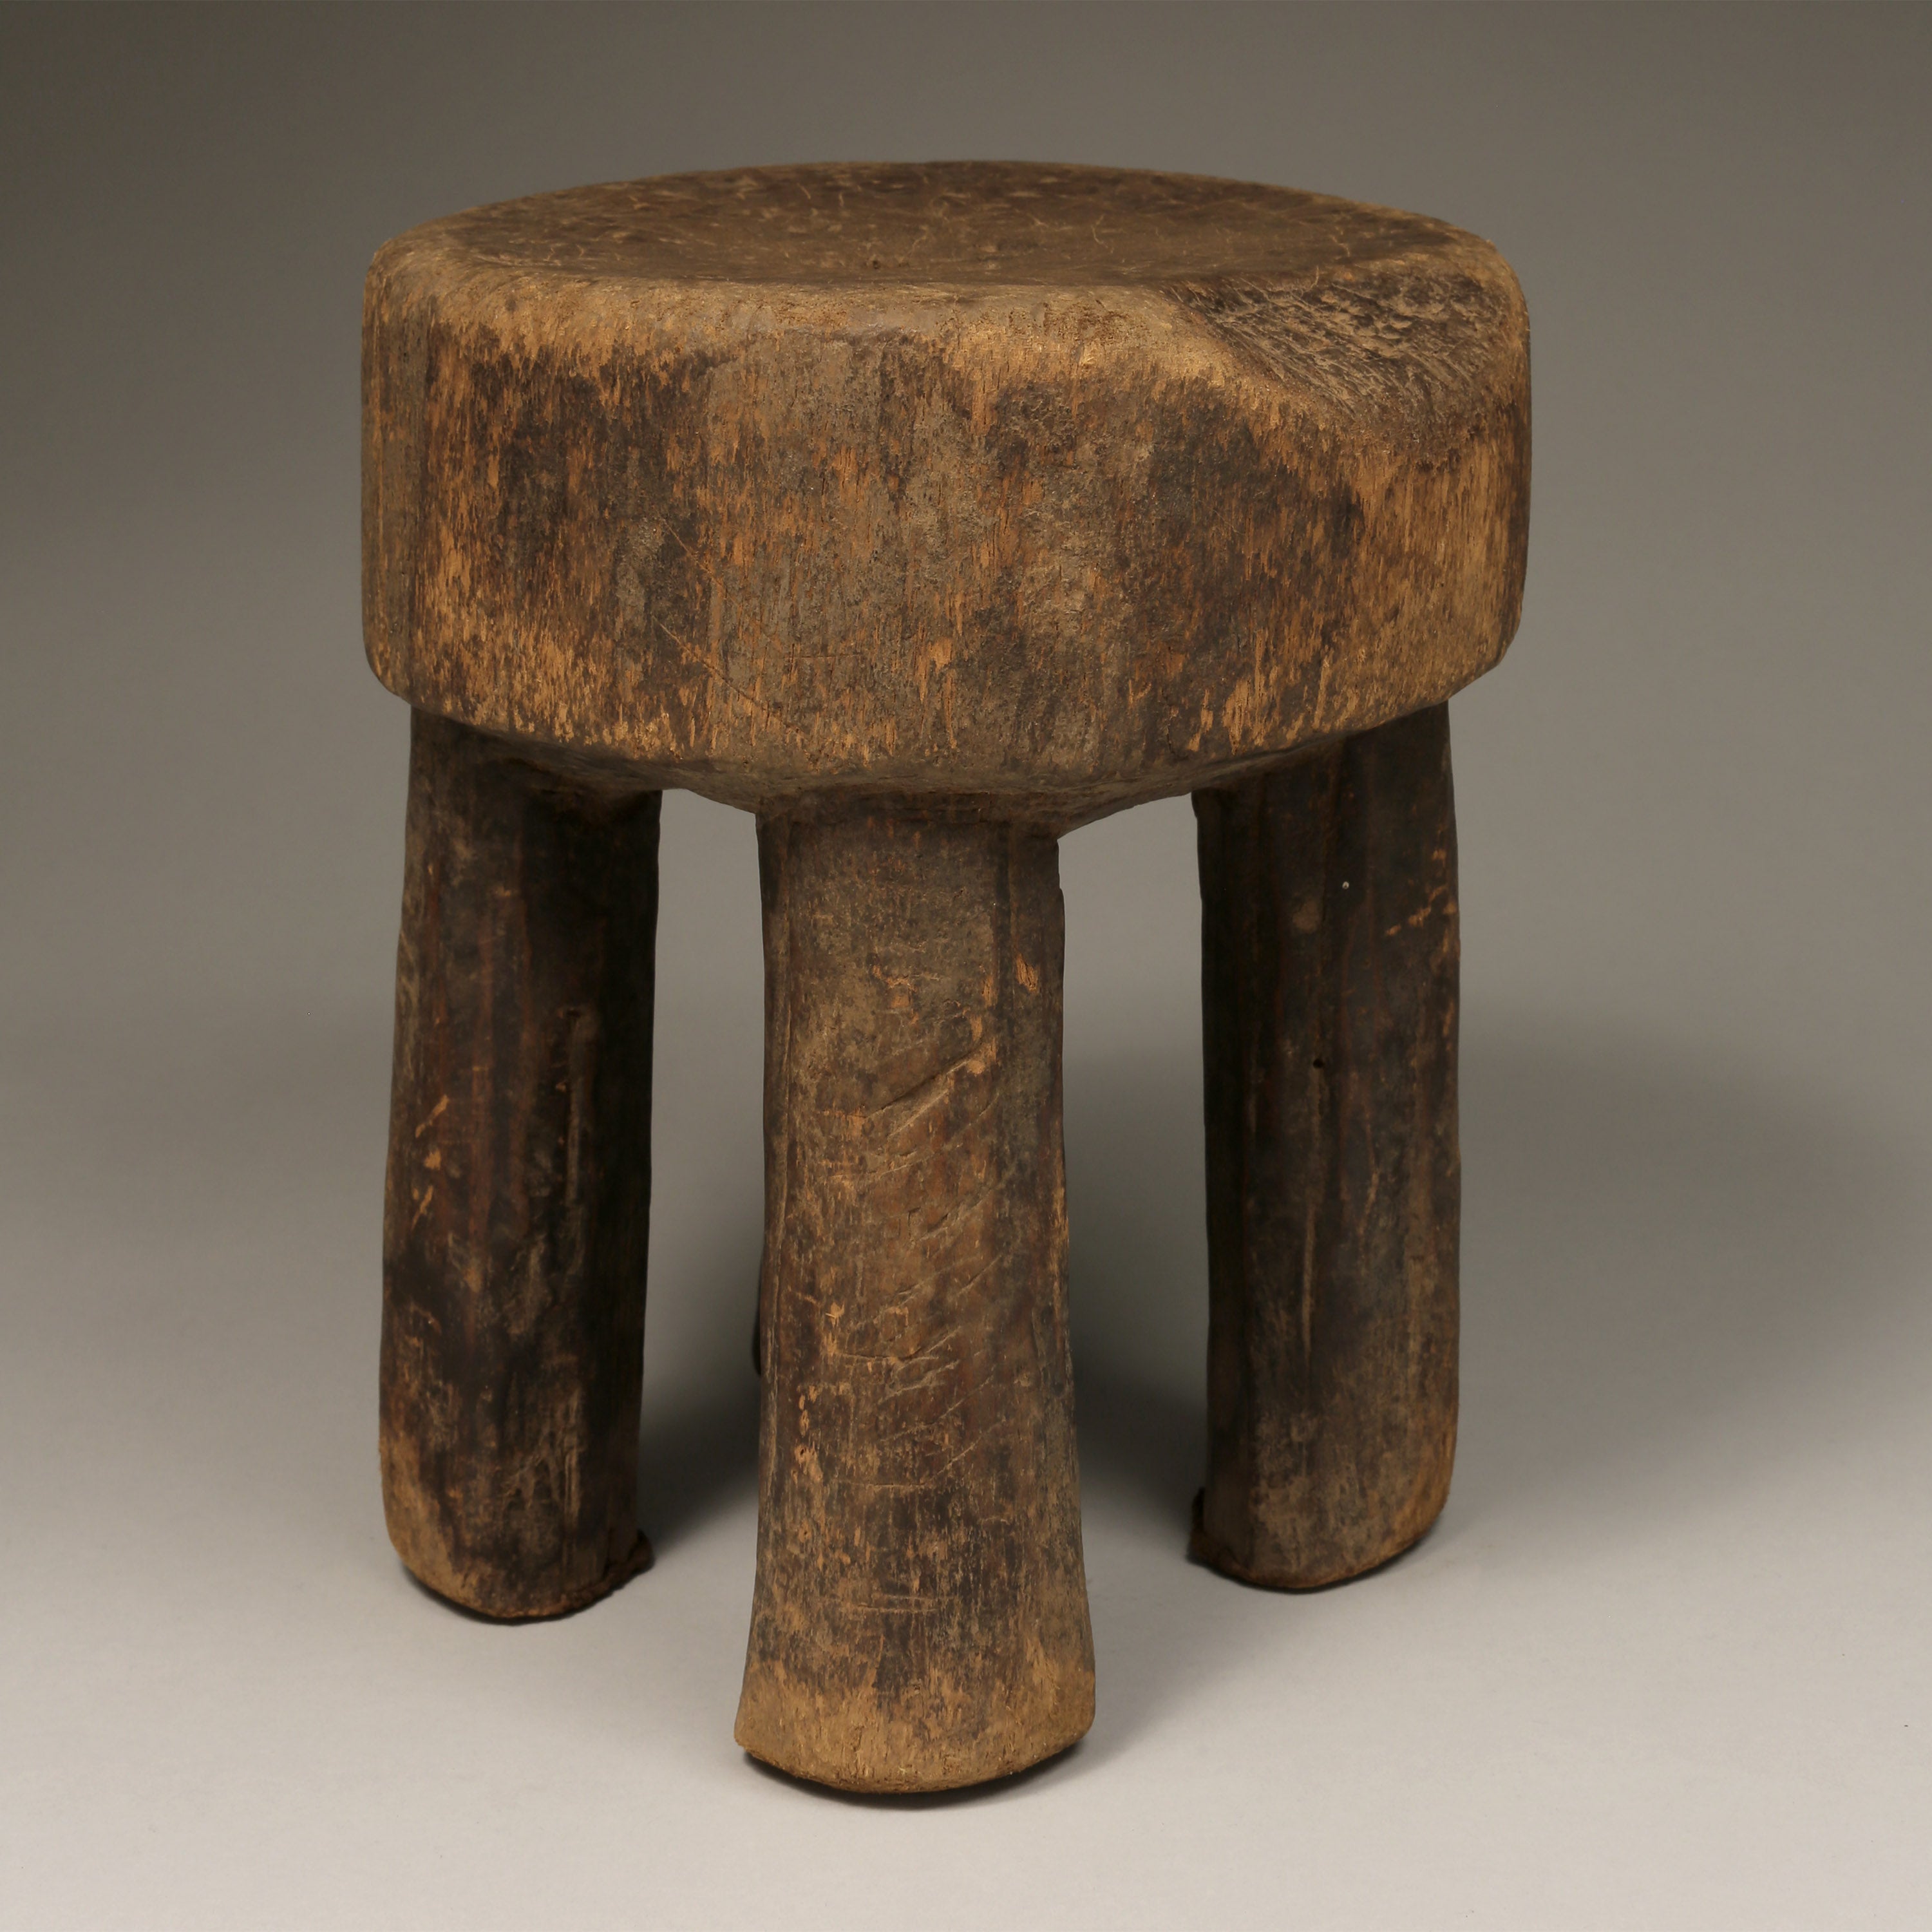 Furniture - African Art;Tribal;Traditional;Low Stool, Senufo Tribe Ivory Coast, Carved Wood